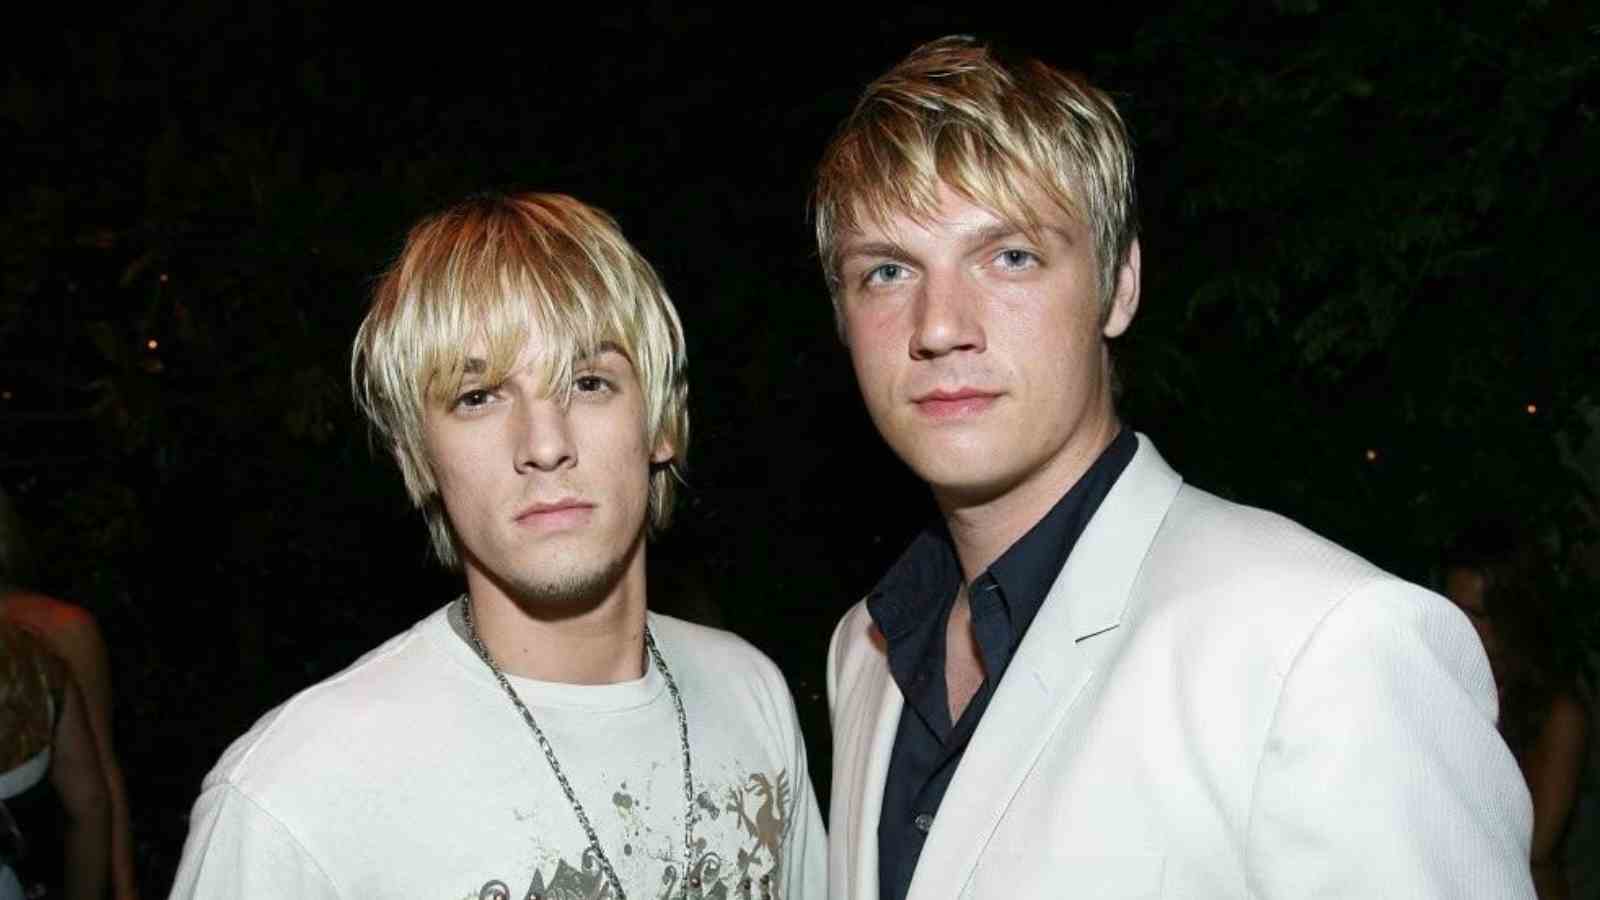 Backstreet Boys member, Nick Carter, lost his younger brother, Aaron Cater due to substance abuse